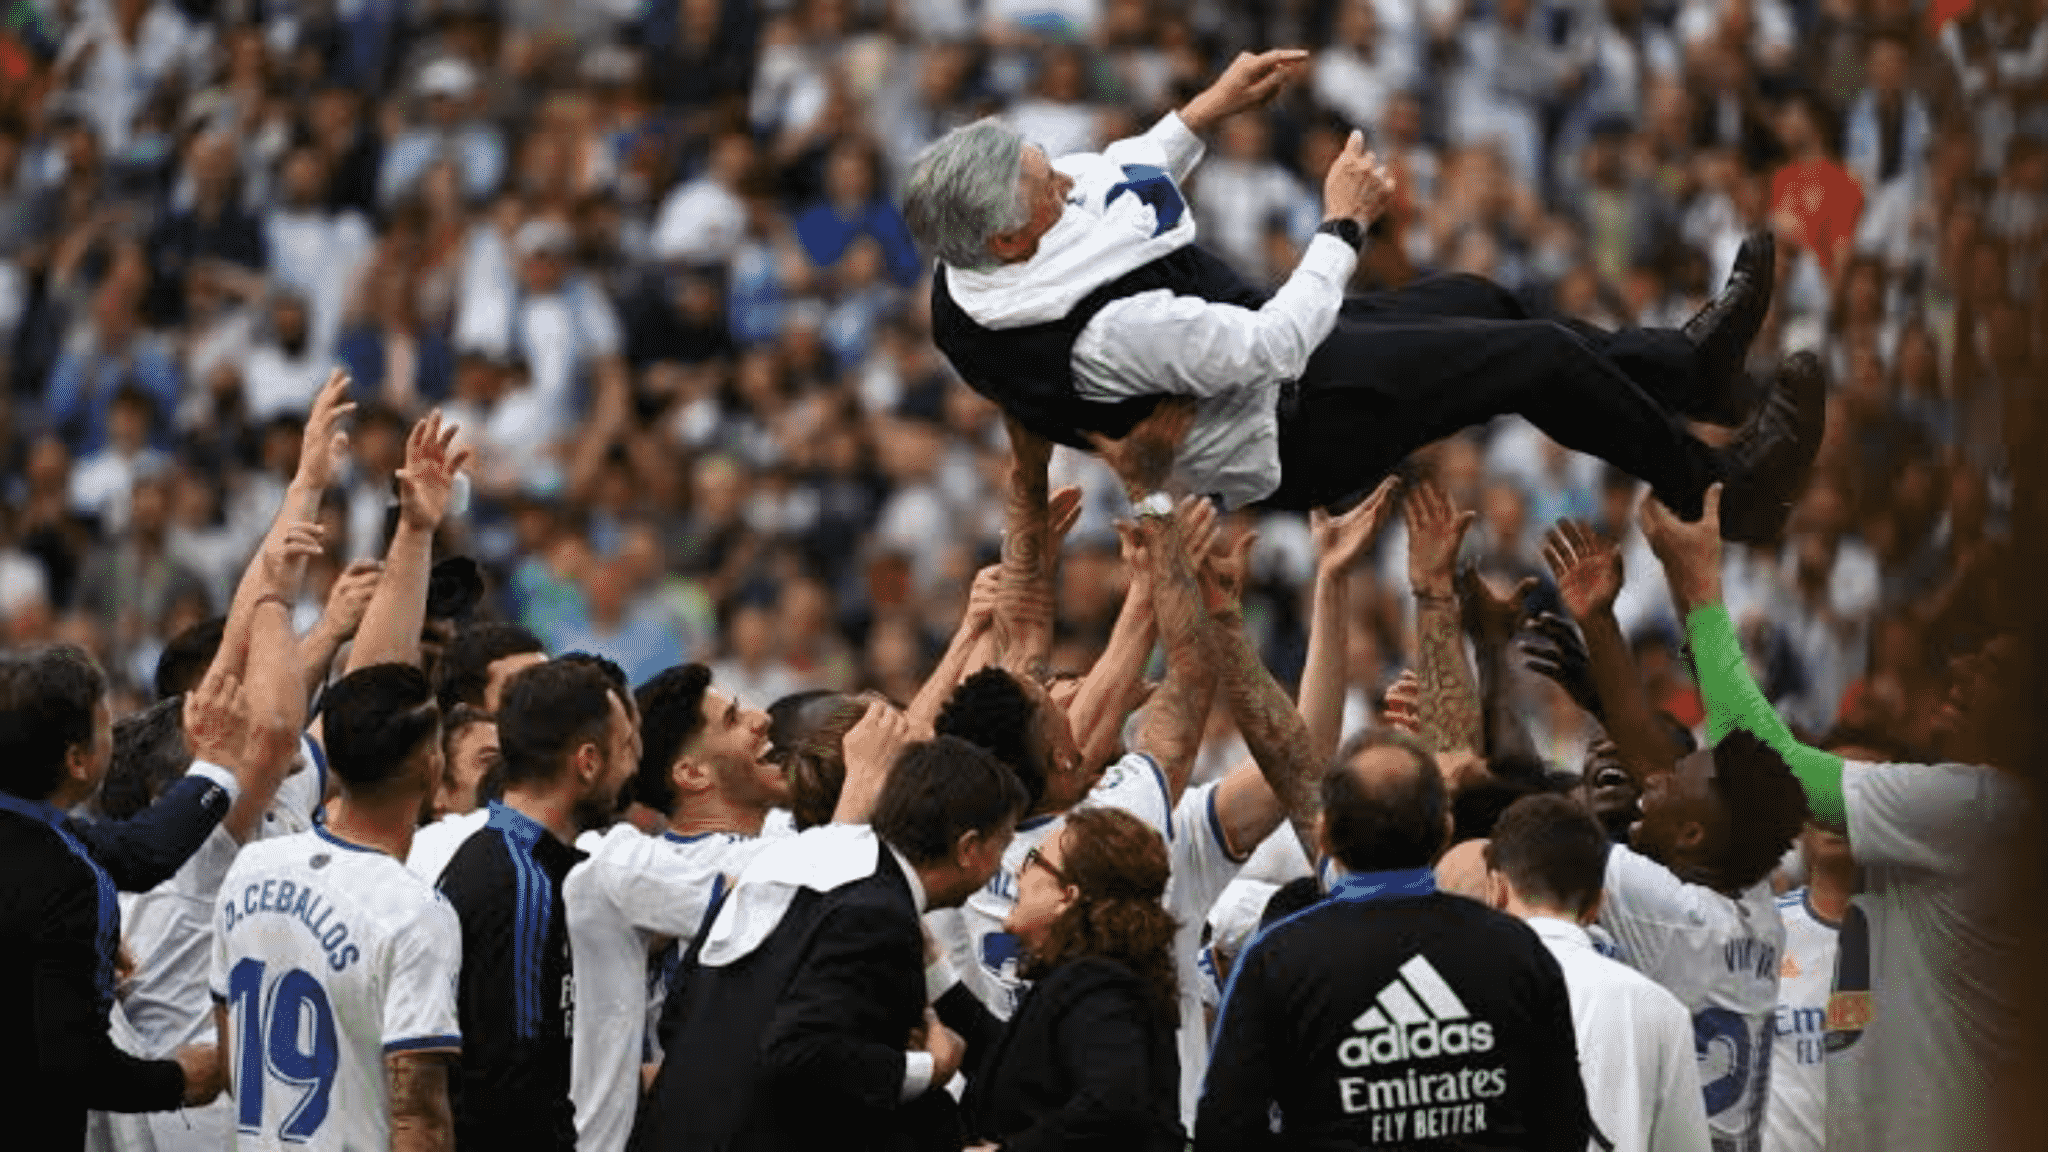 Ancelotti Makes History as Real Madrid Win Record-Extending 35th LaLiga, My Football Facts